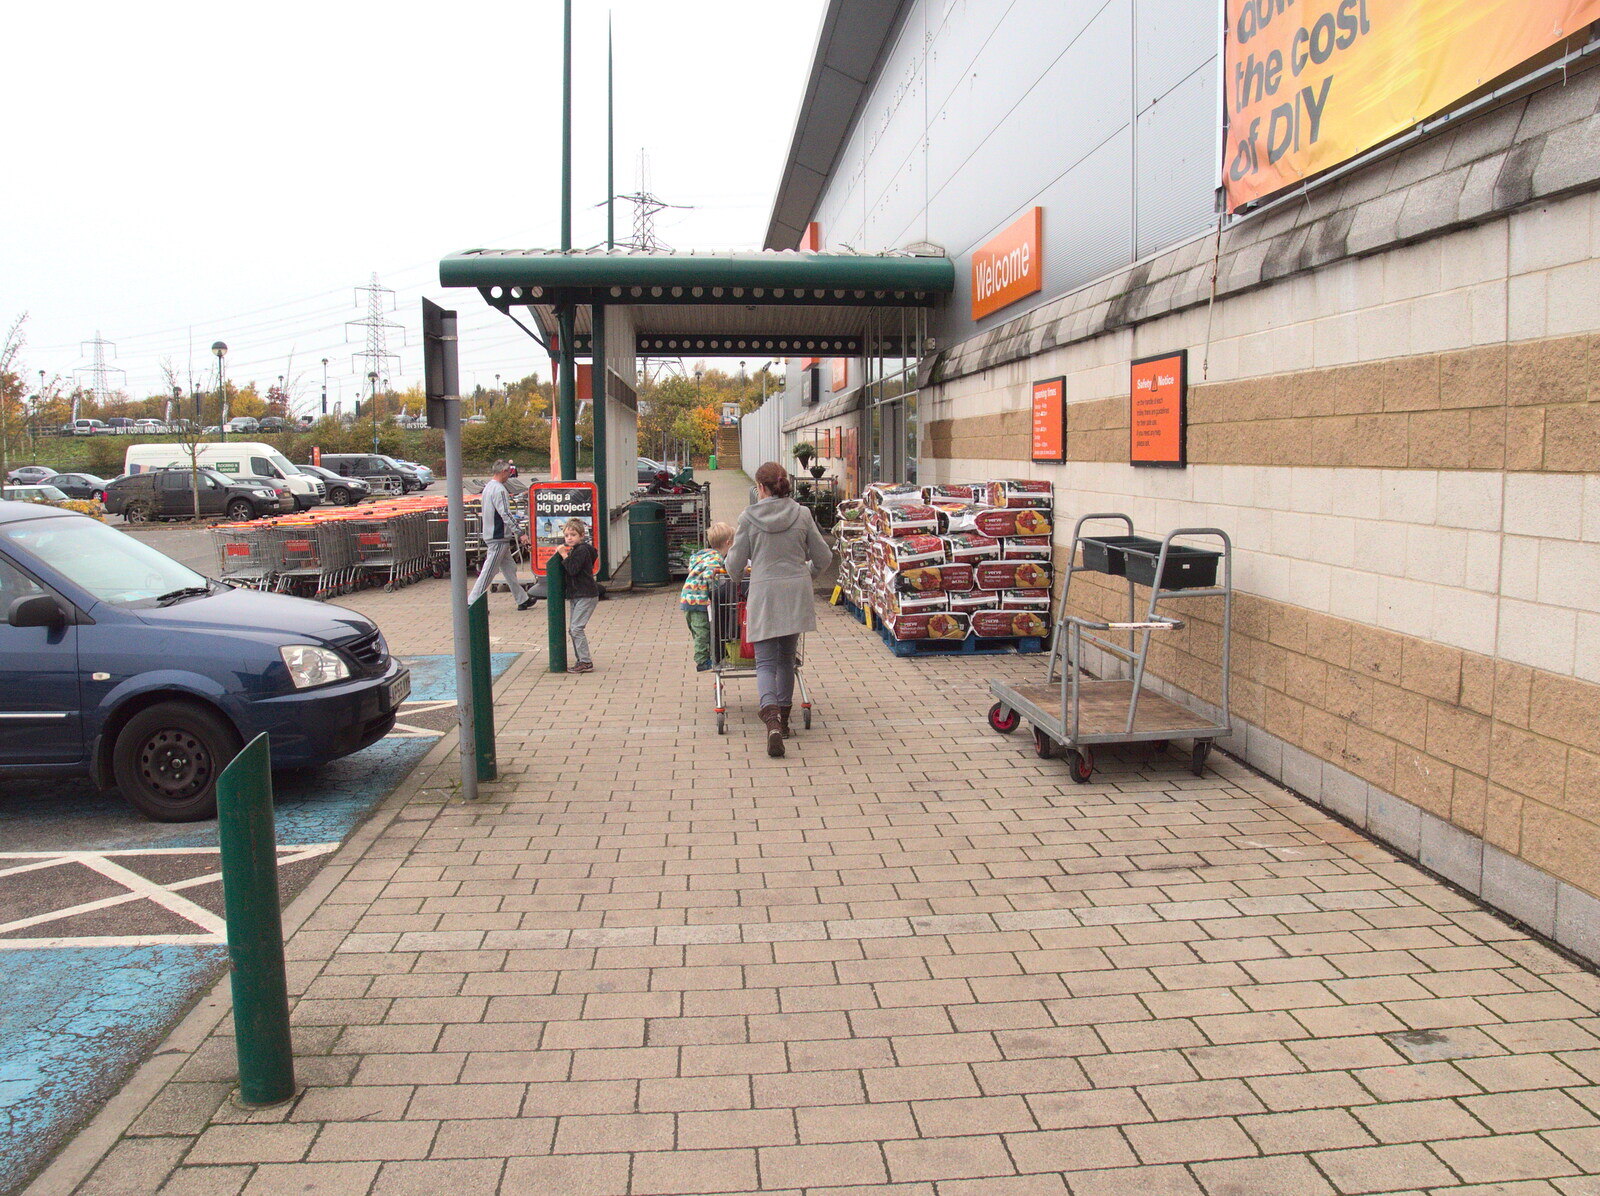 Isobel outside B&Q in Ipswich from The BBs at Centre Parcs, Elvedon, Norfolk - 5th November 2015